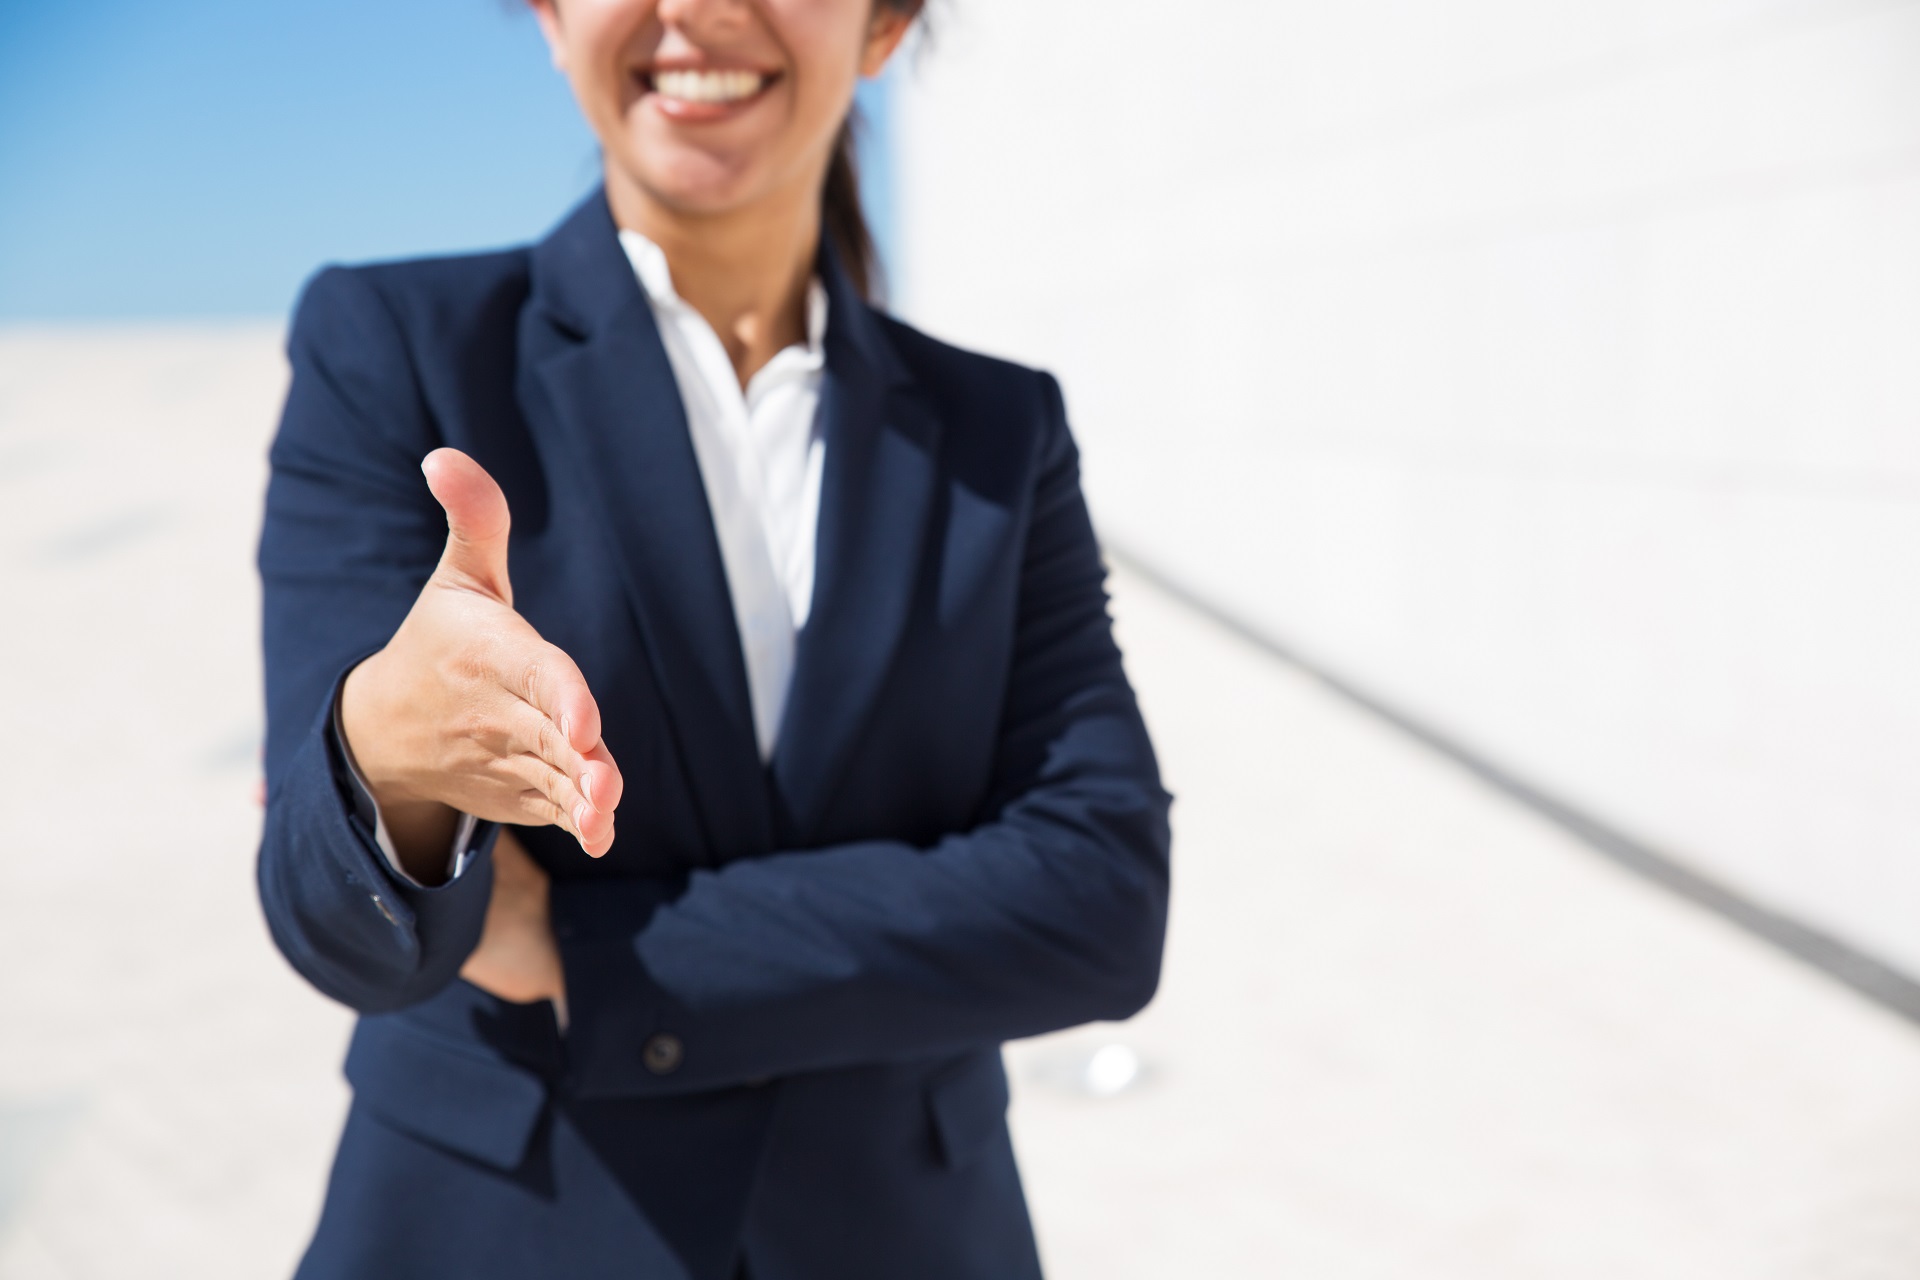 Smiling HR manager congratulating with getting job. Cropped portrait of positive woman in formal suit standing outdoors and offering hand for handshake. Business offer concept